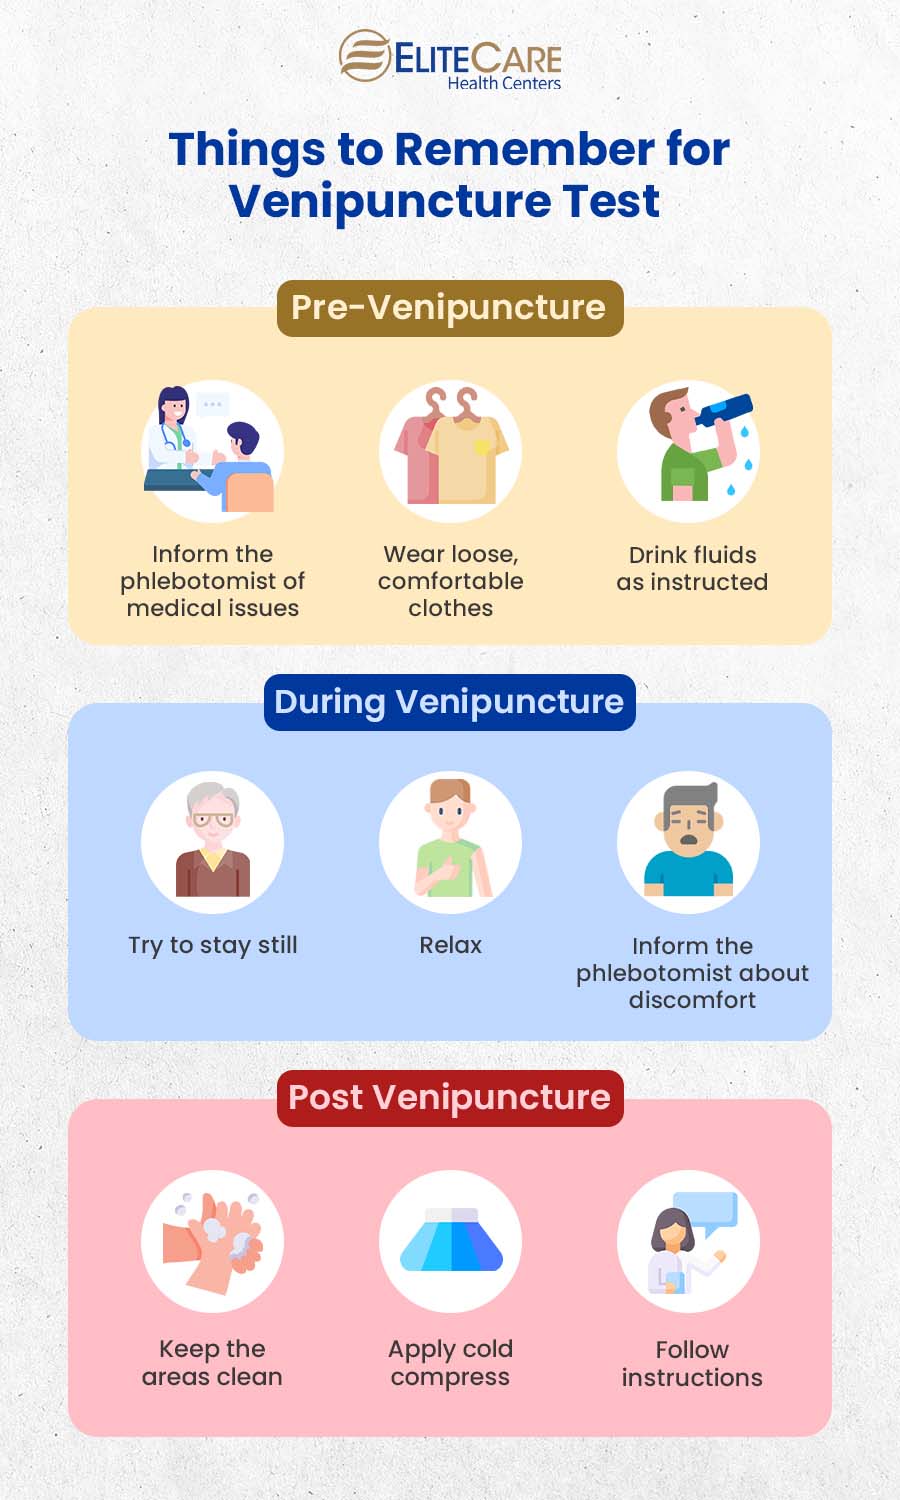 Things to Remember for Venipuncture Test